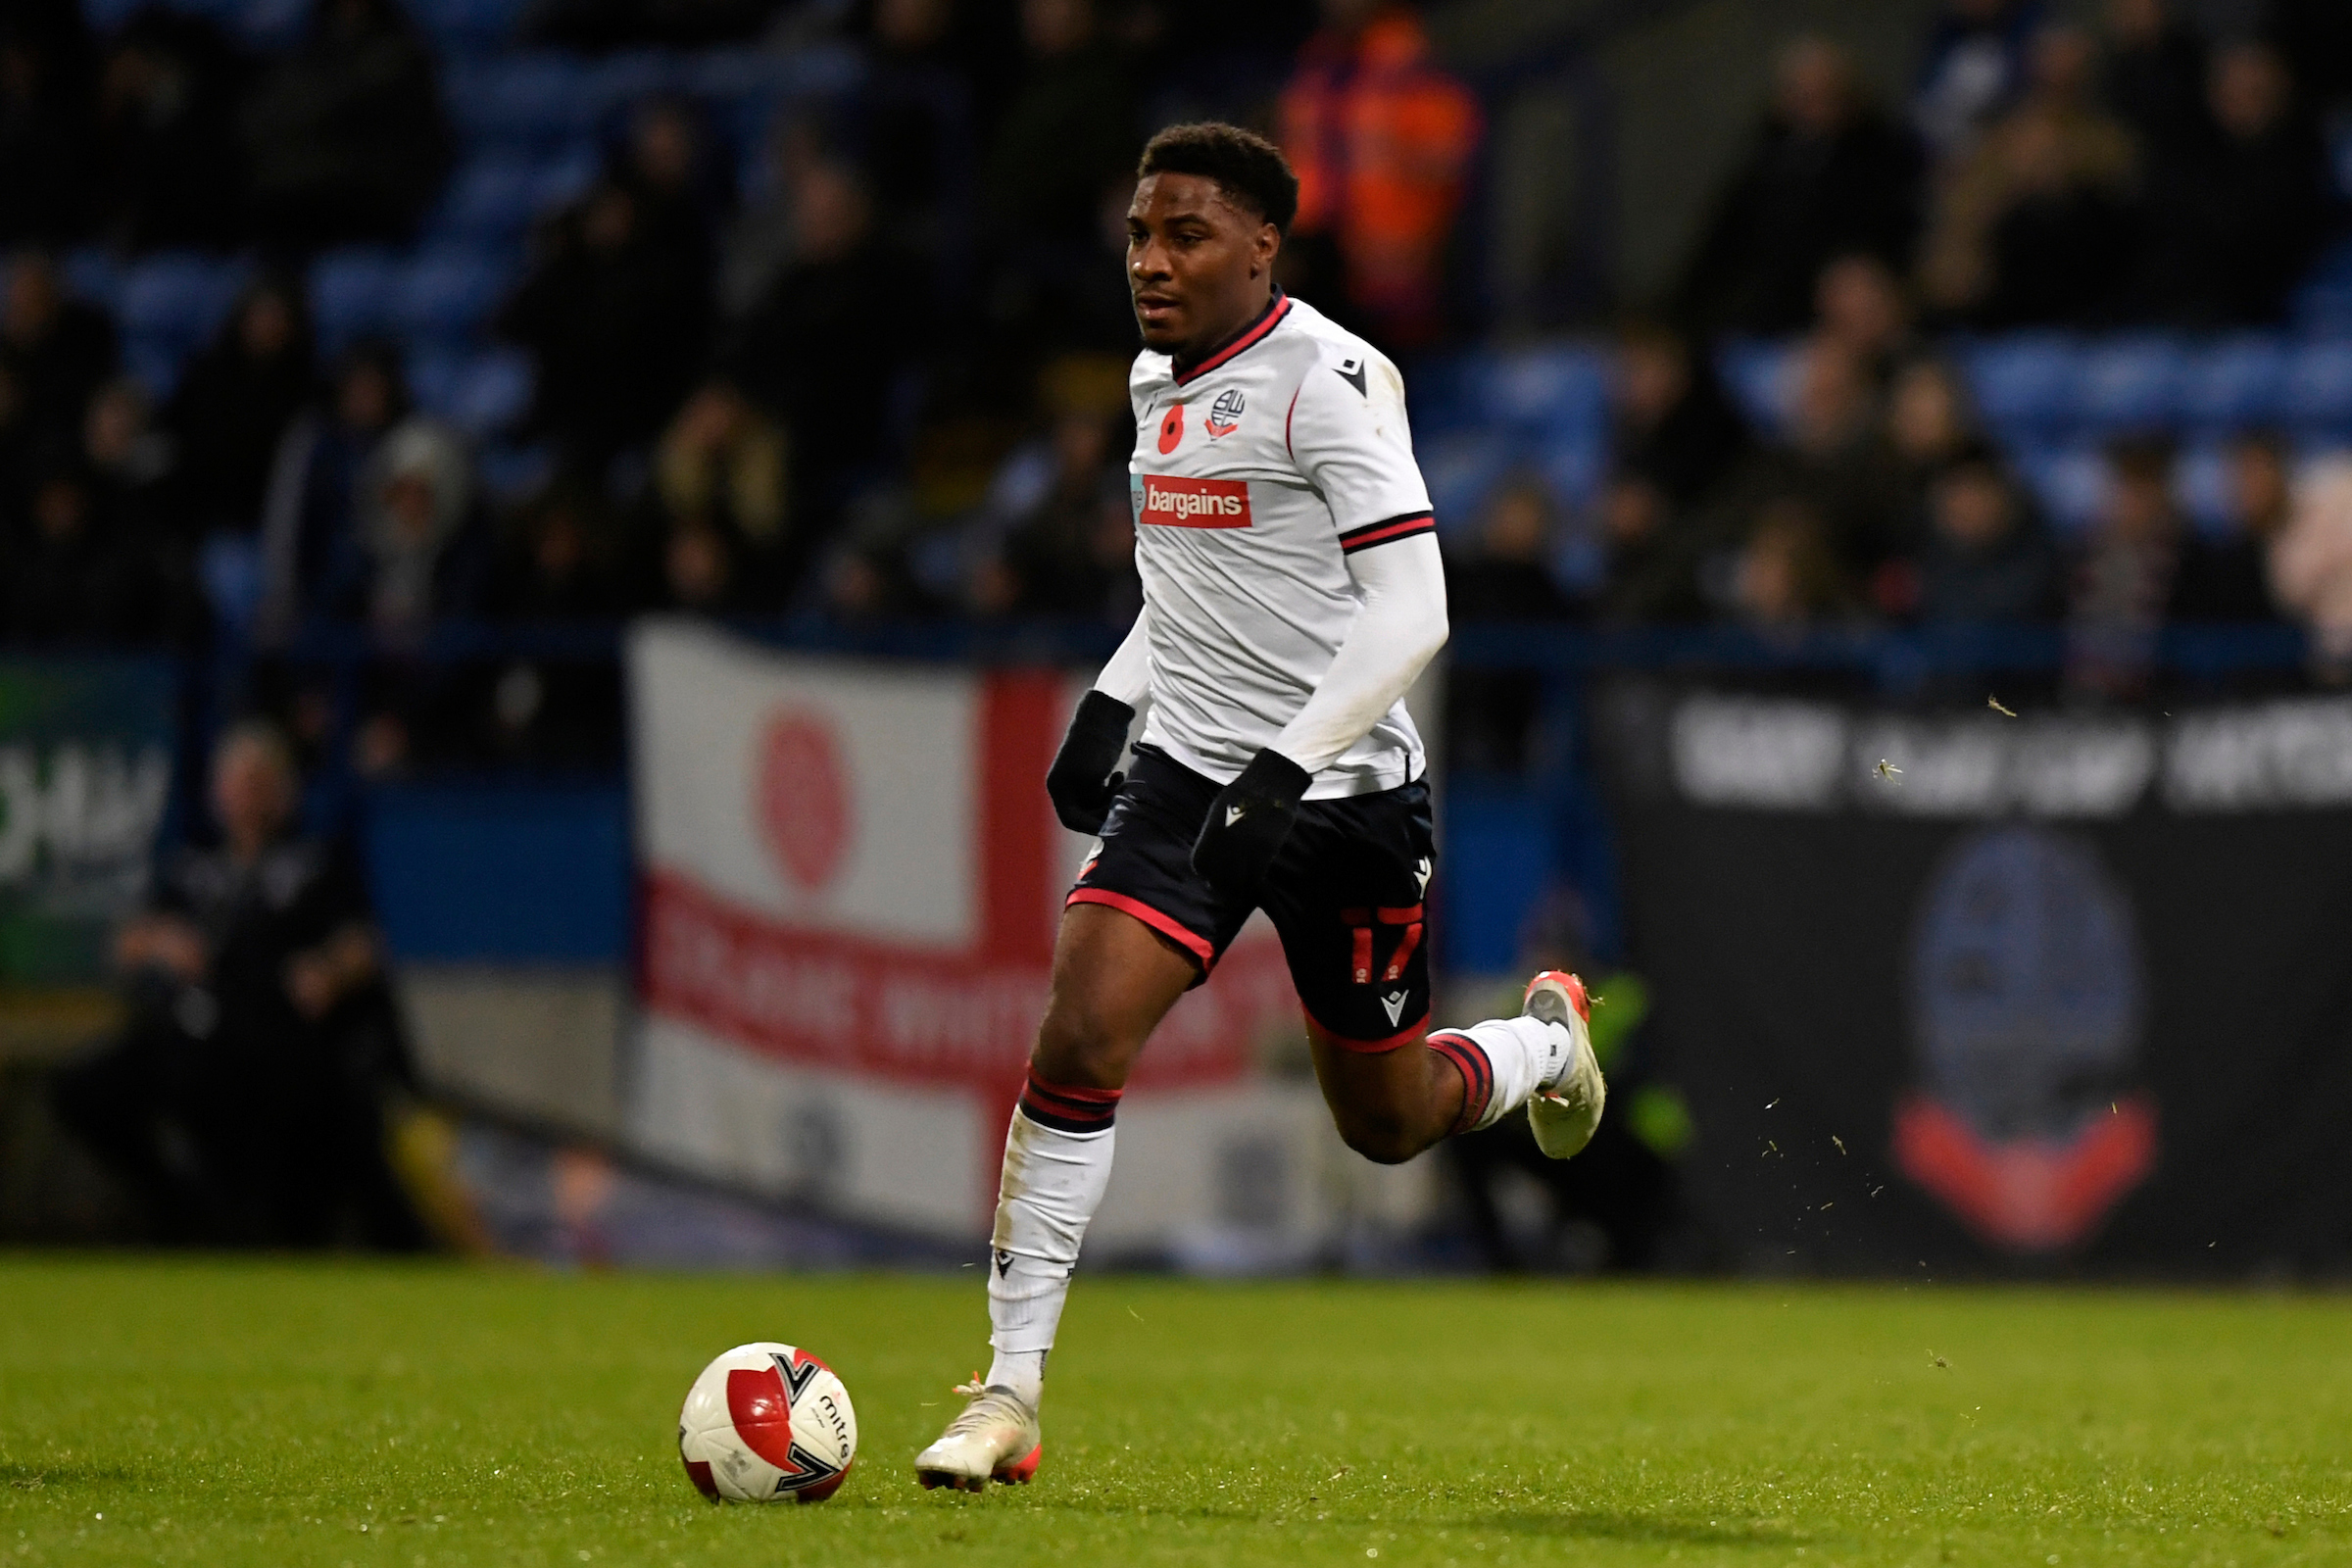 Match of the Day pundits praise Bolton's Dapo Afolayan after Stockport draw